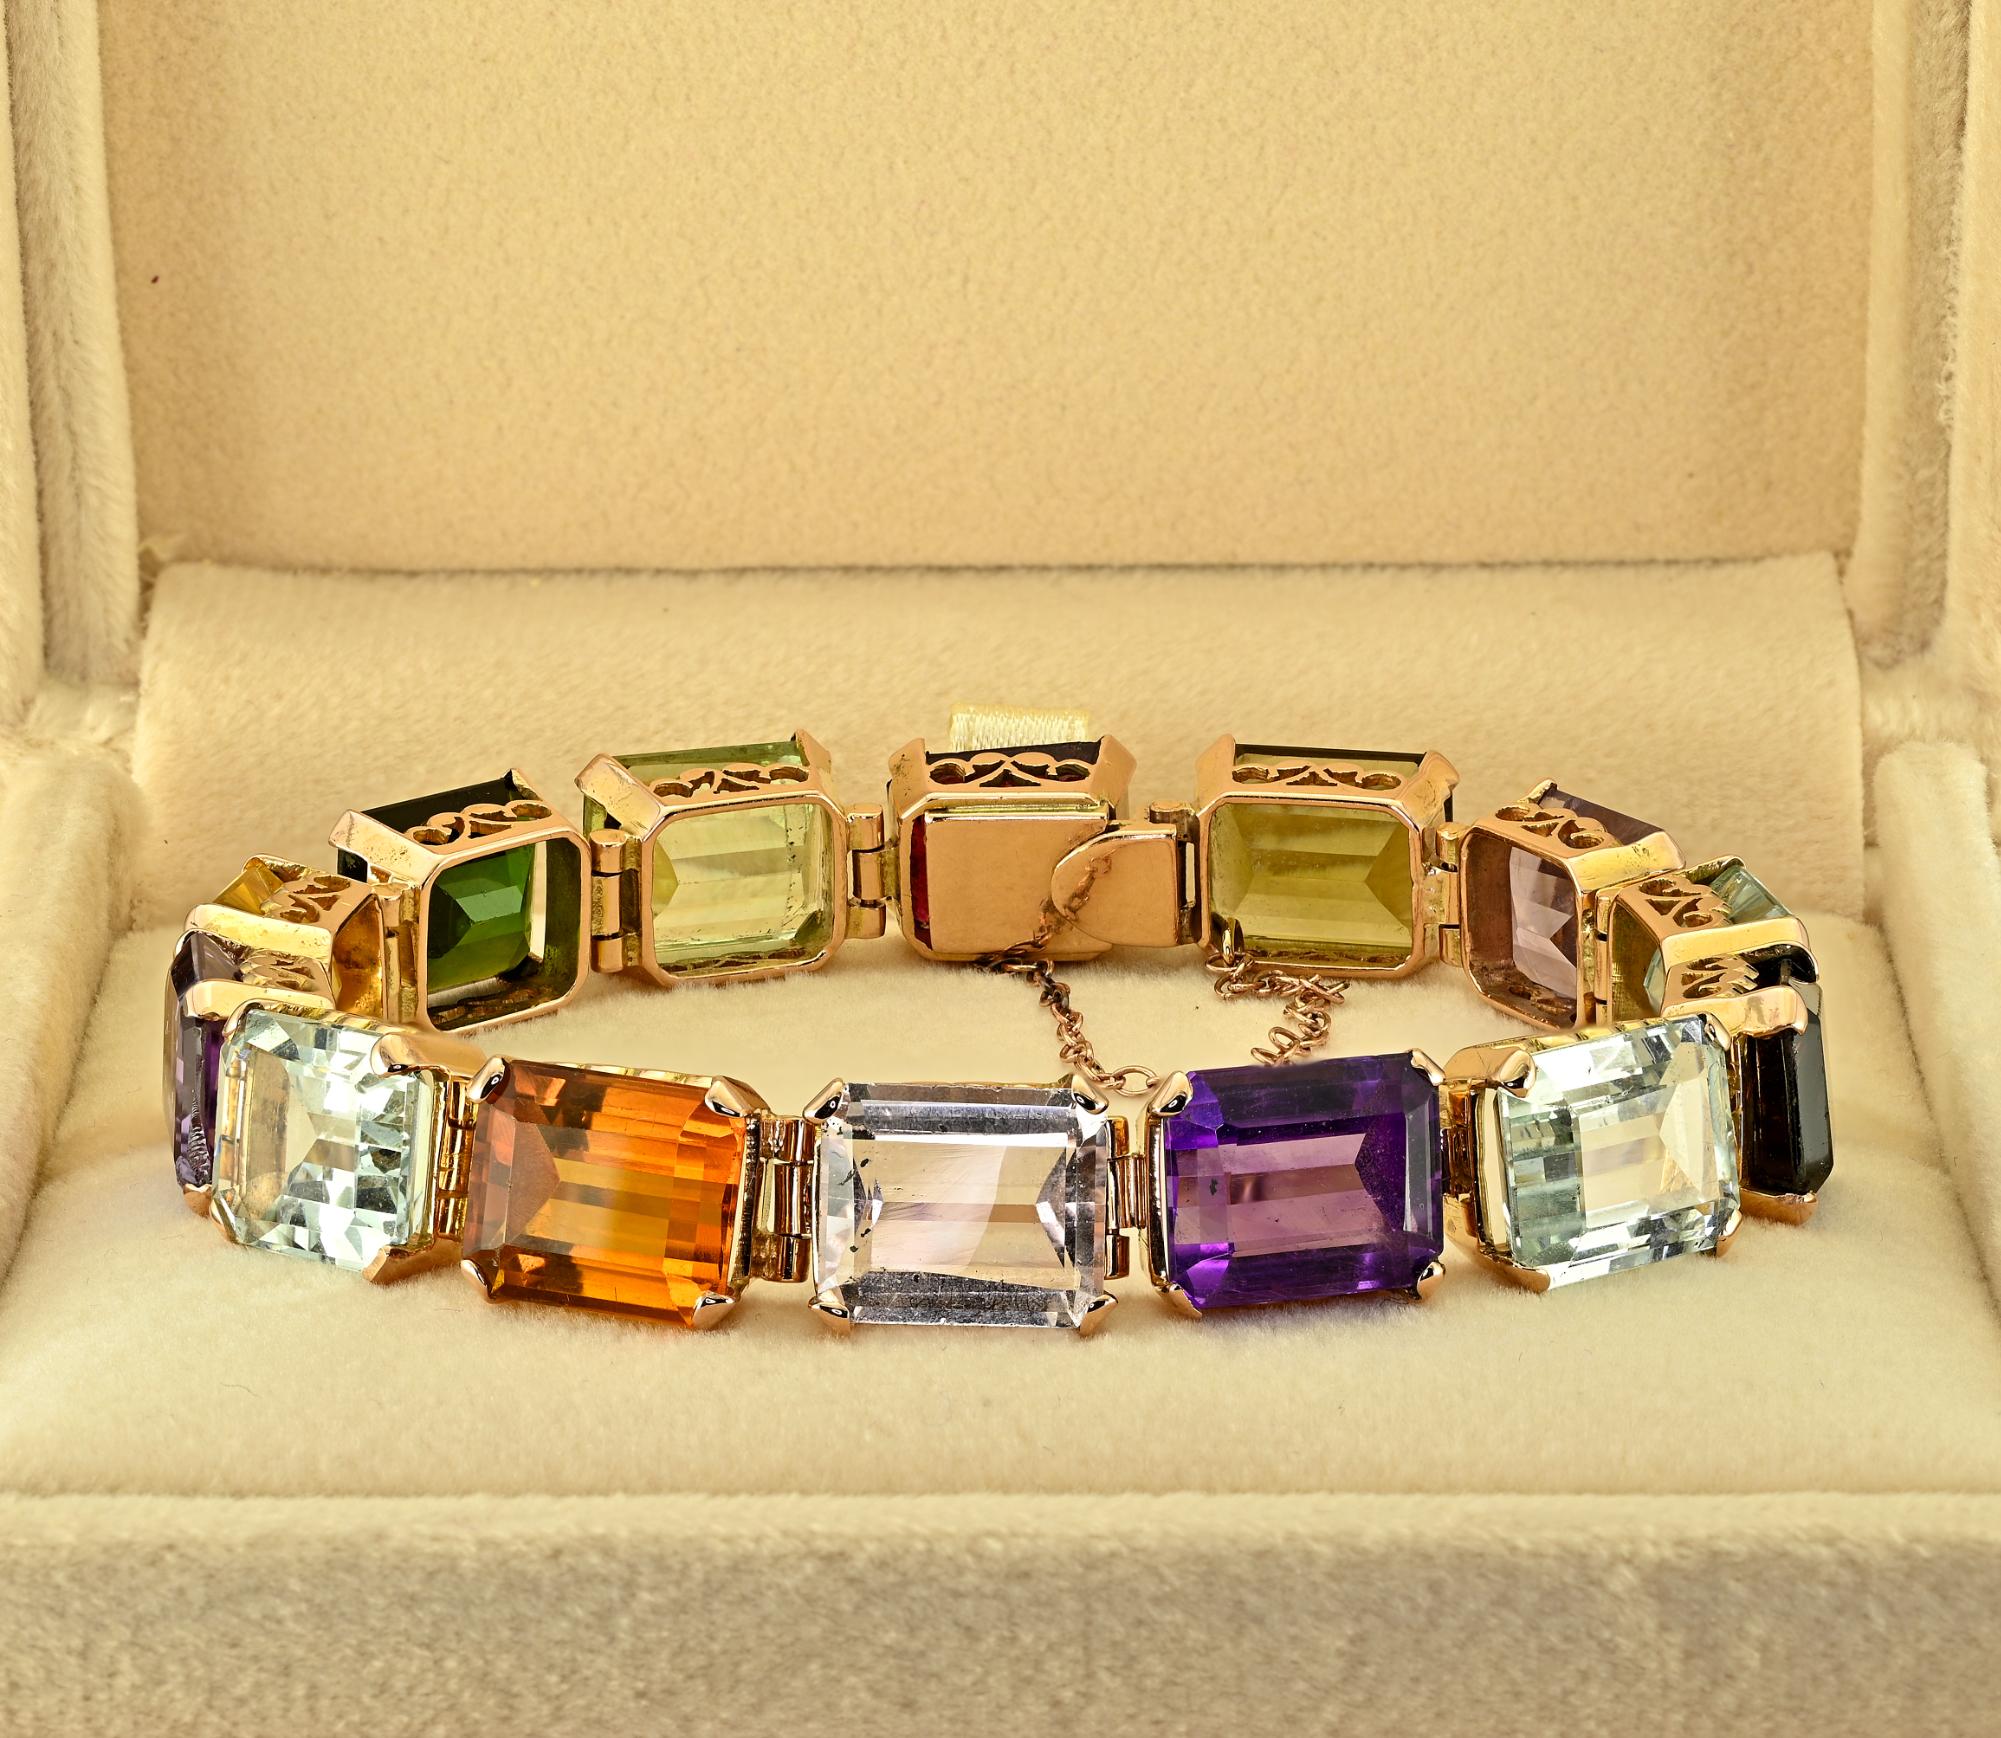 This outstanding and quite impressive Victorian bracelet is 1890 ca
Glorious workmanship of the era entirely hand made of solid 18 Kt rose gold
Comprising a selection of natural untreated earth mined colored gemstones each set in a dedicated pierced